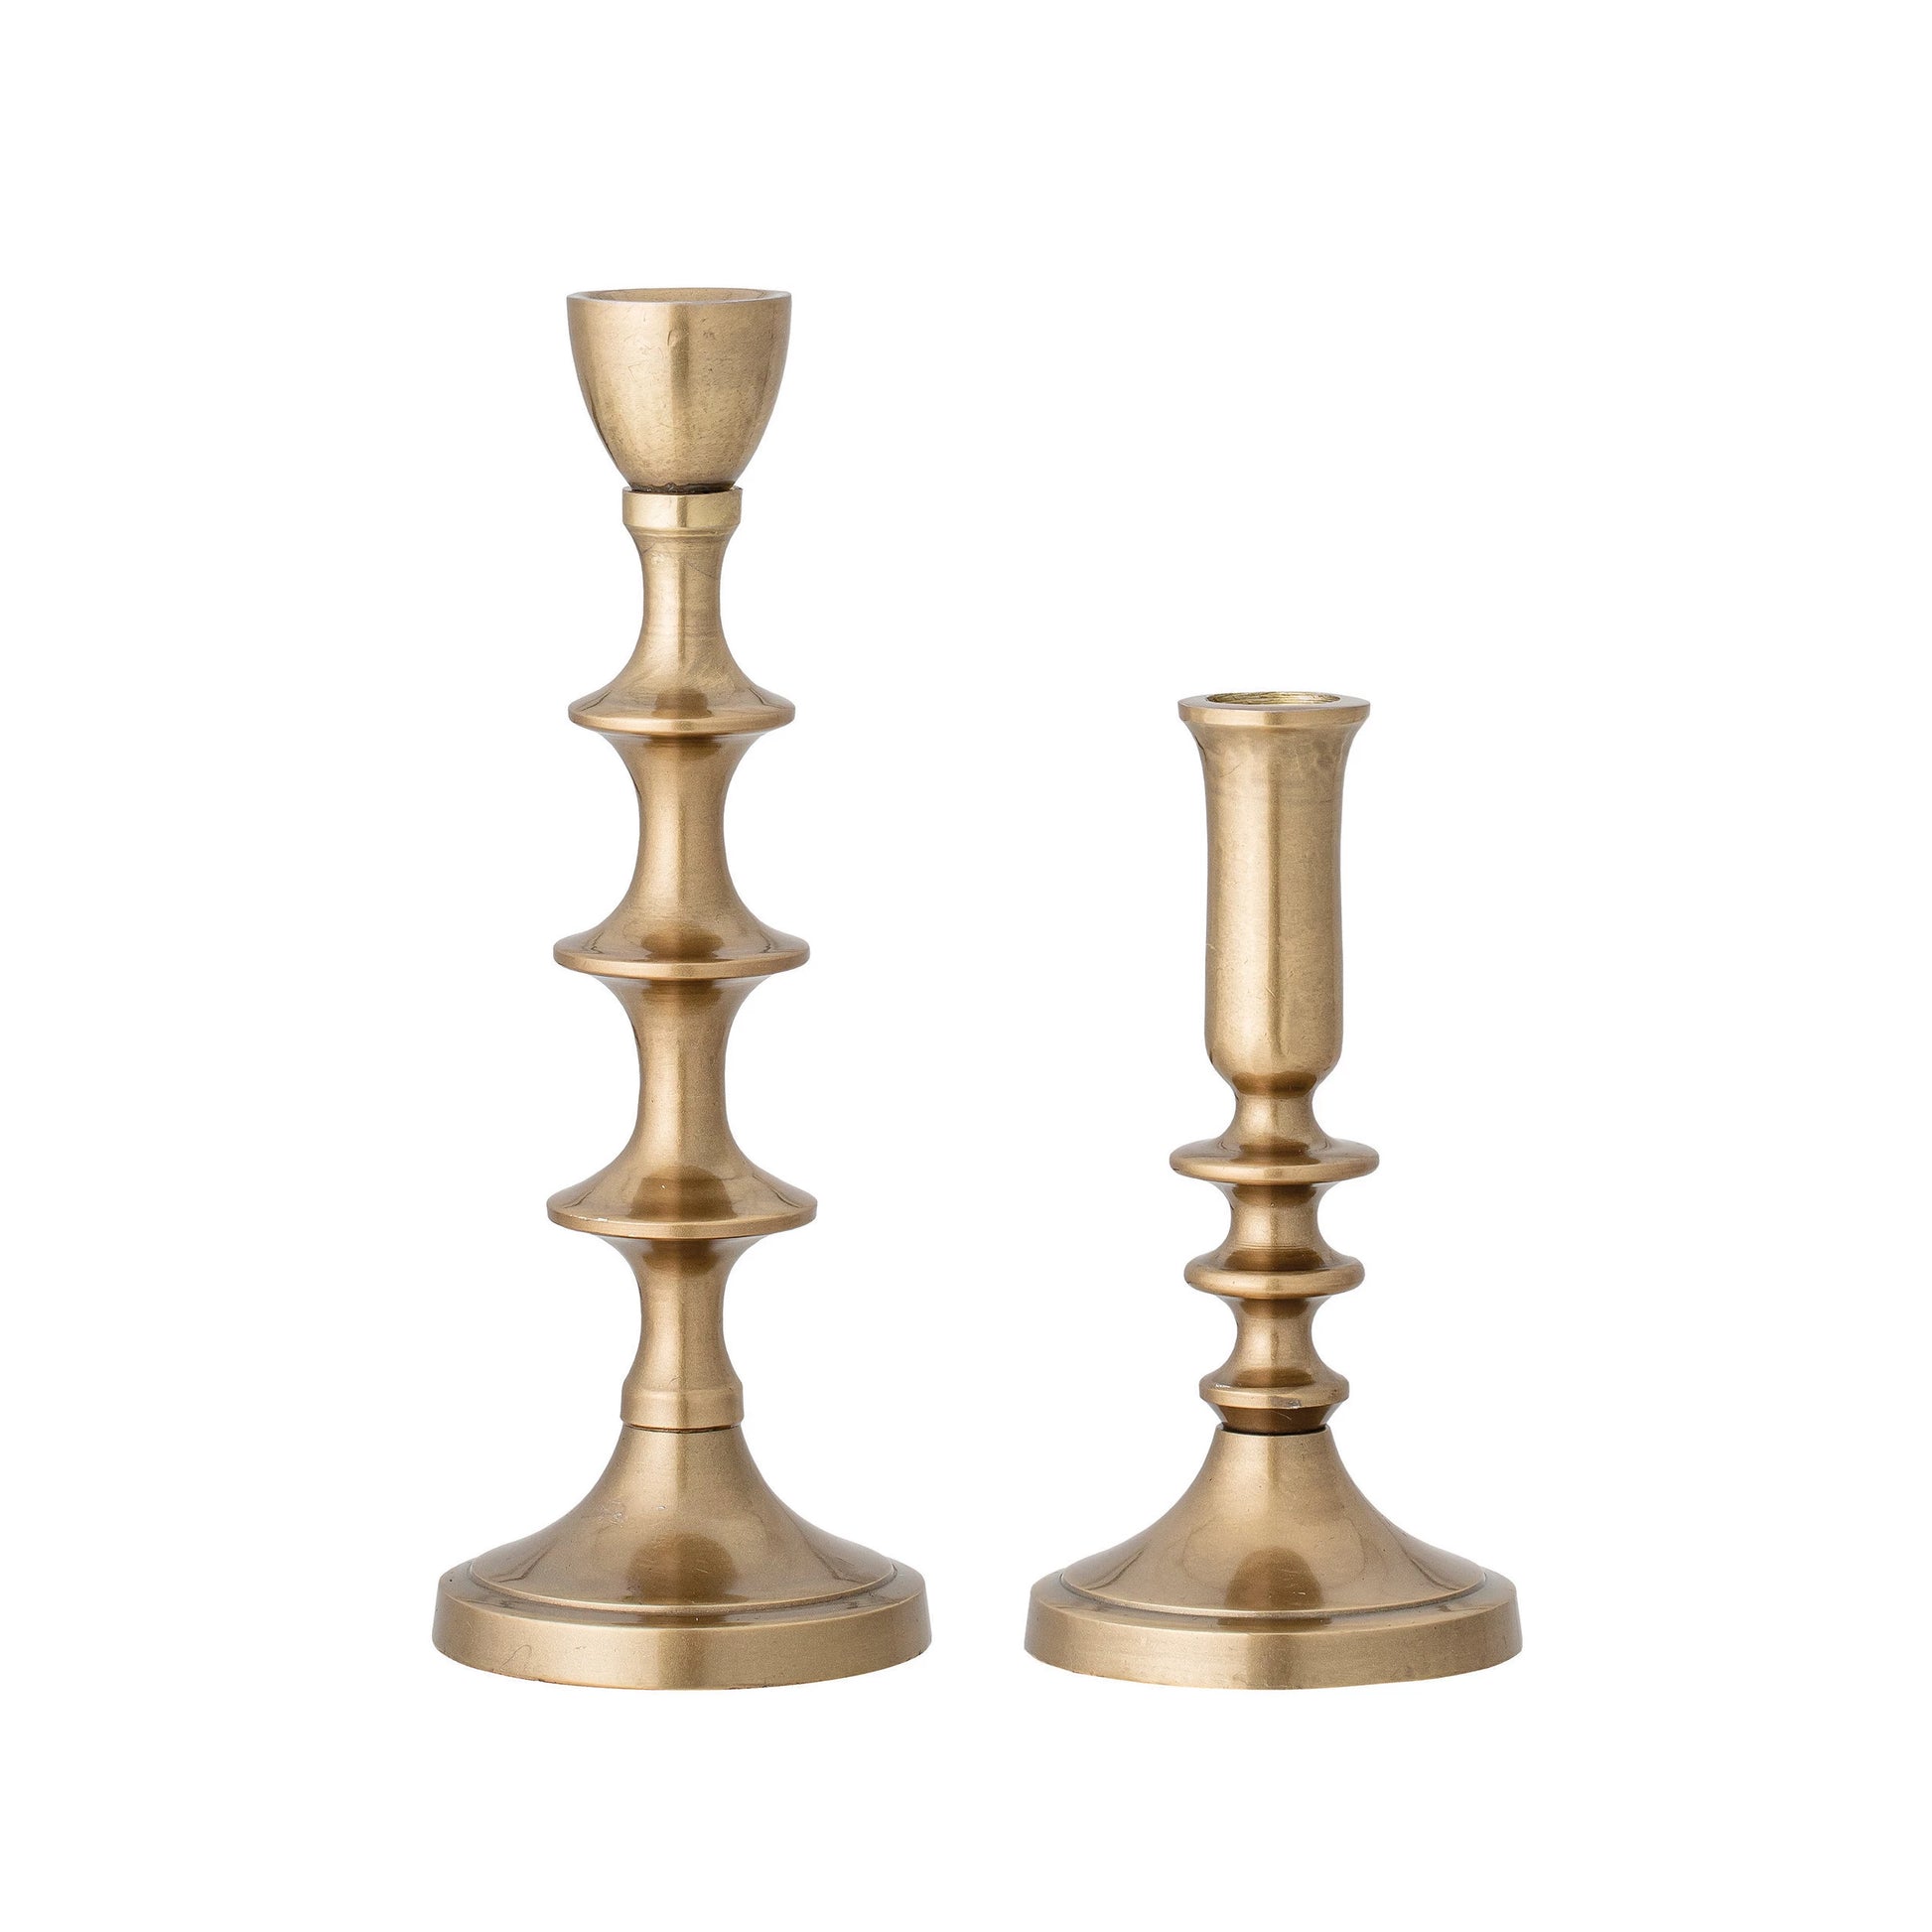 2 styles of antique gold taper holders on a white background.